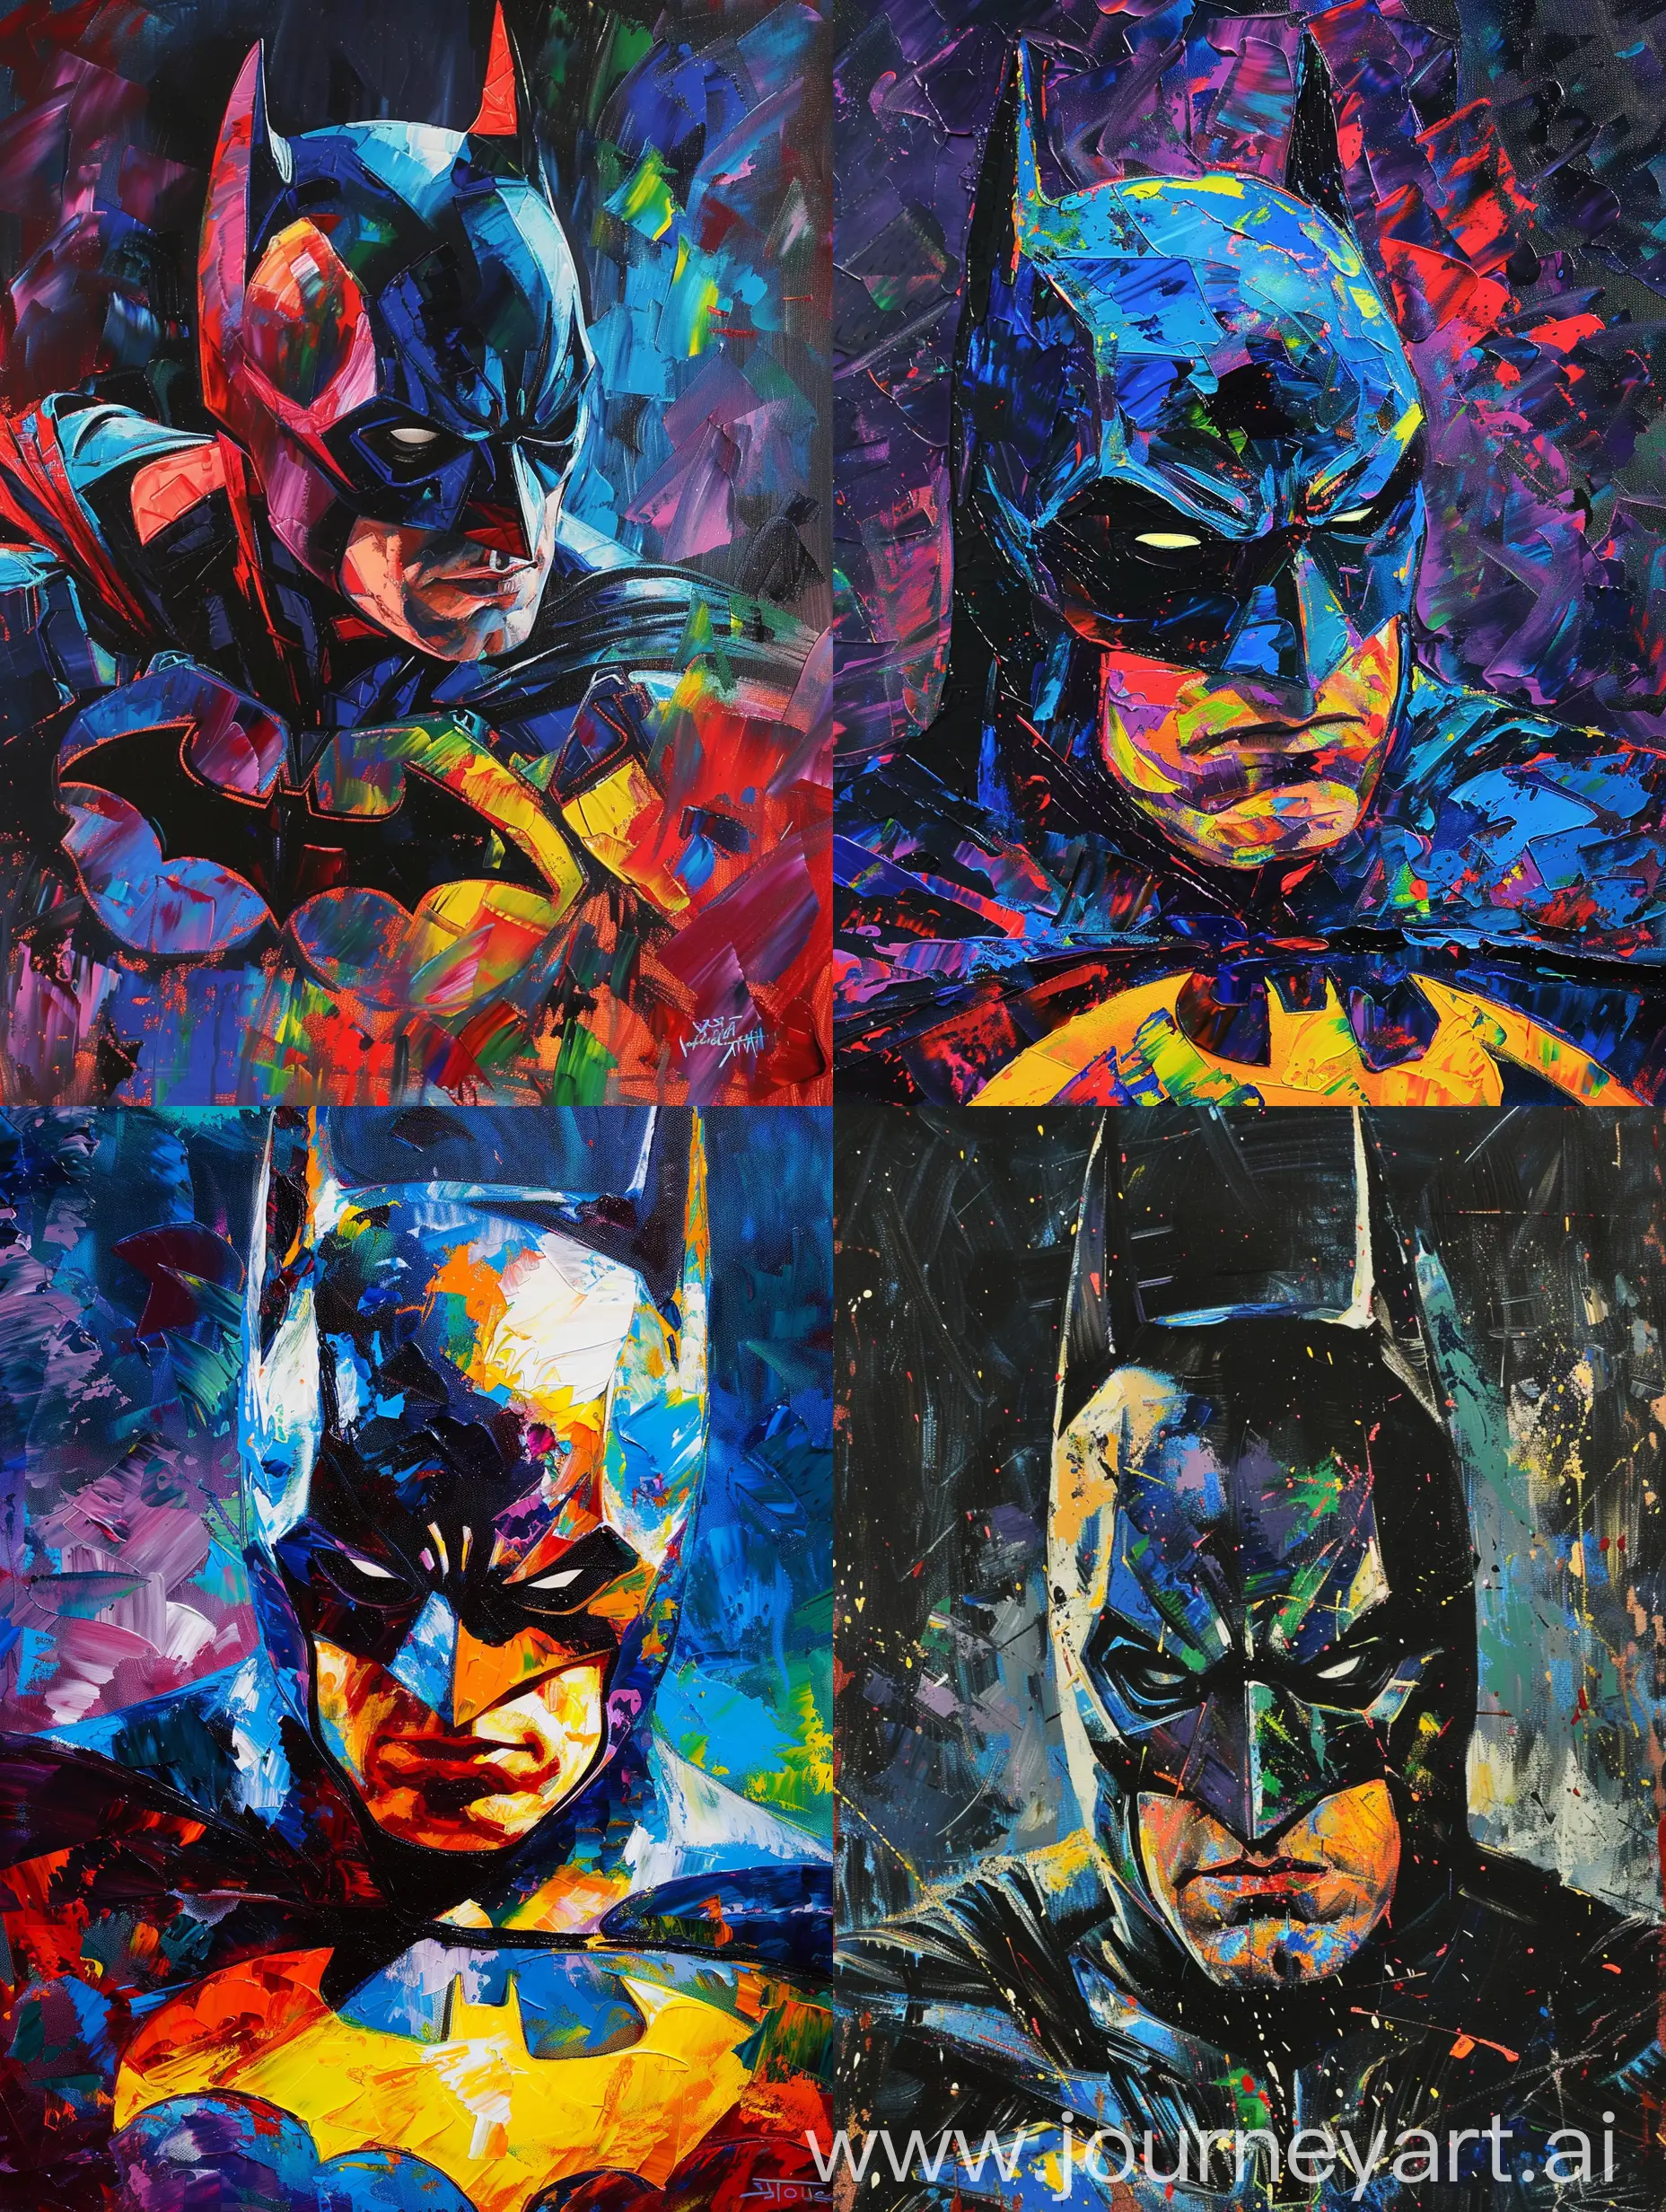 oil painting of batman, extreme radioactive colors, bright, van gogh style
